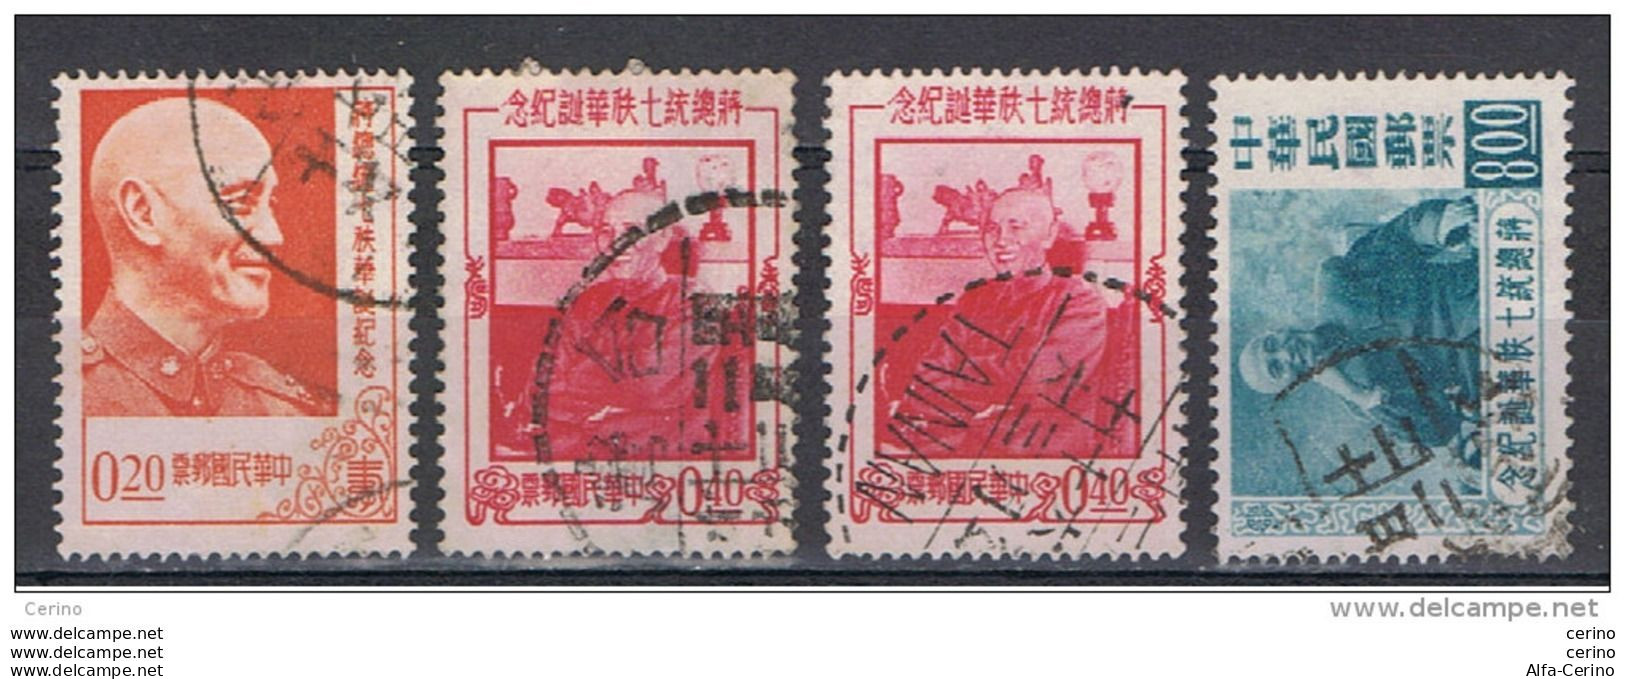 TAIWAN:  1956  ANNIVERSARY  -  4  USED  STAMPS  -  YV/TELL. 213//218 - Gebraucht